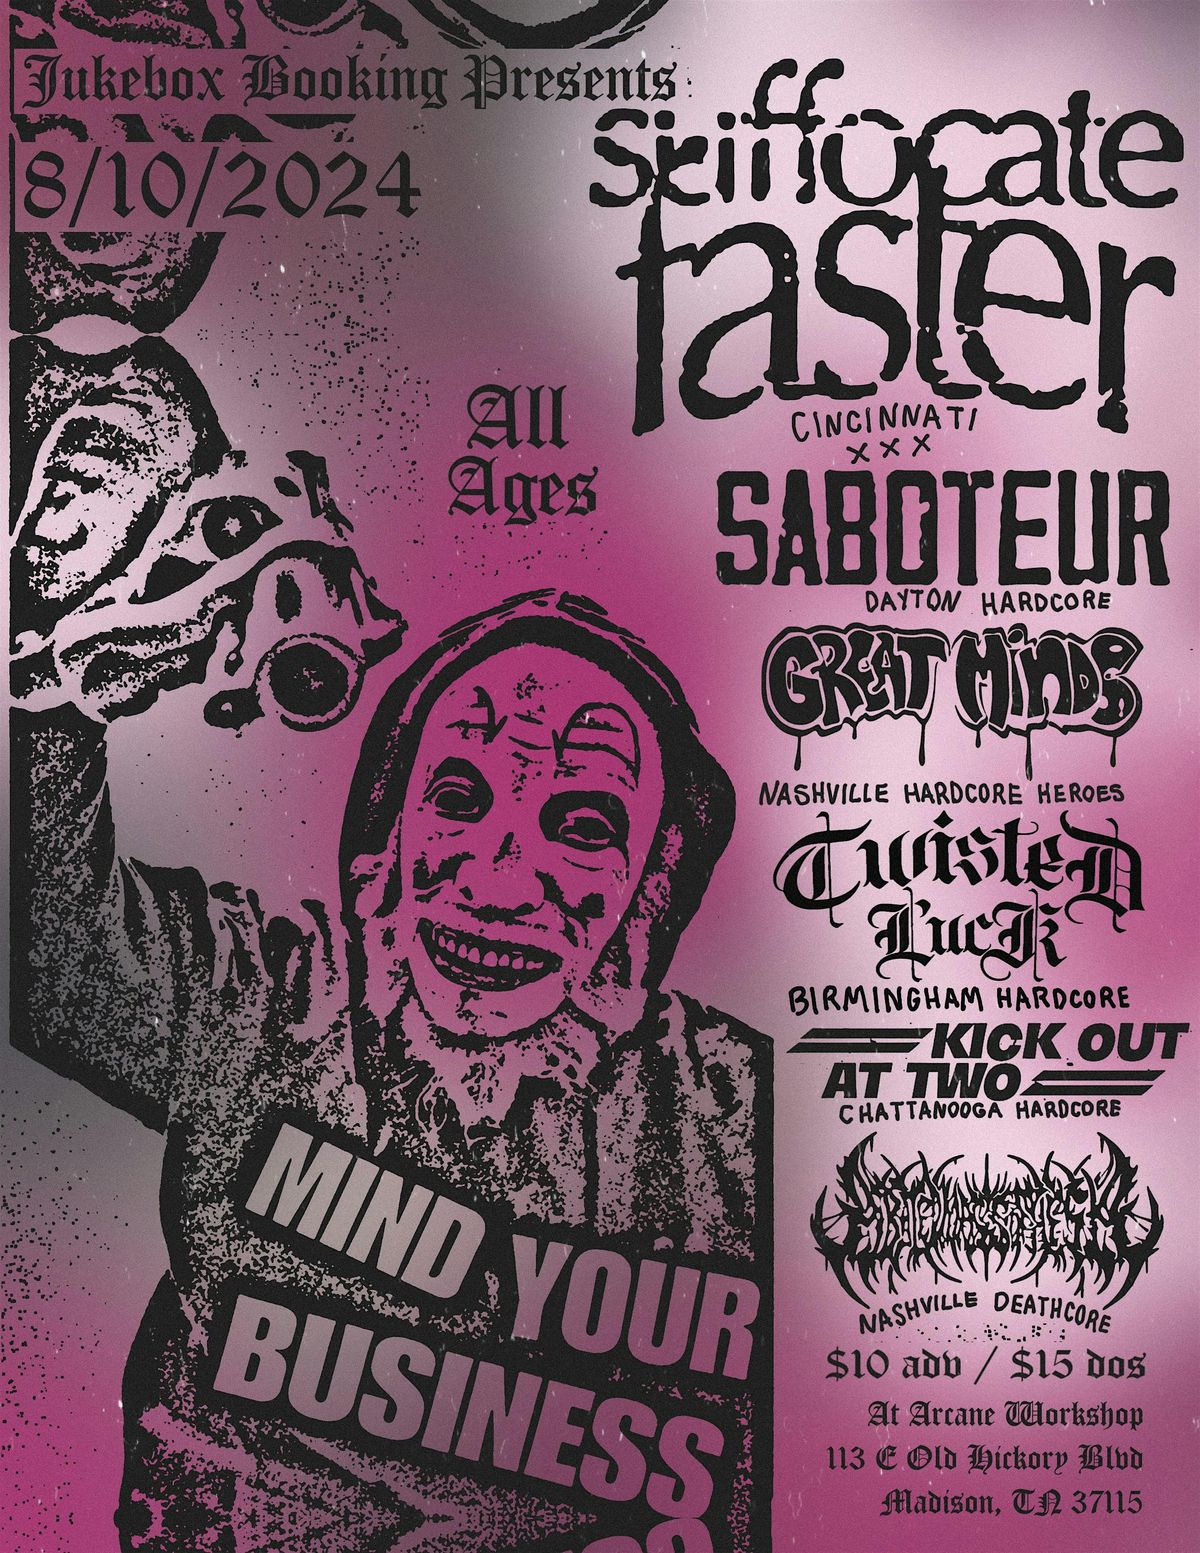 Suffocate Faster, Saboteur, Great Minds, Twisted Luck, Kick Out @ 2, Abated